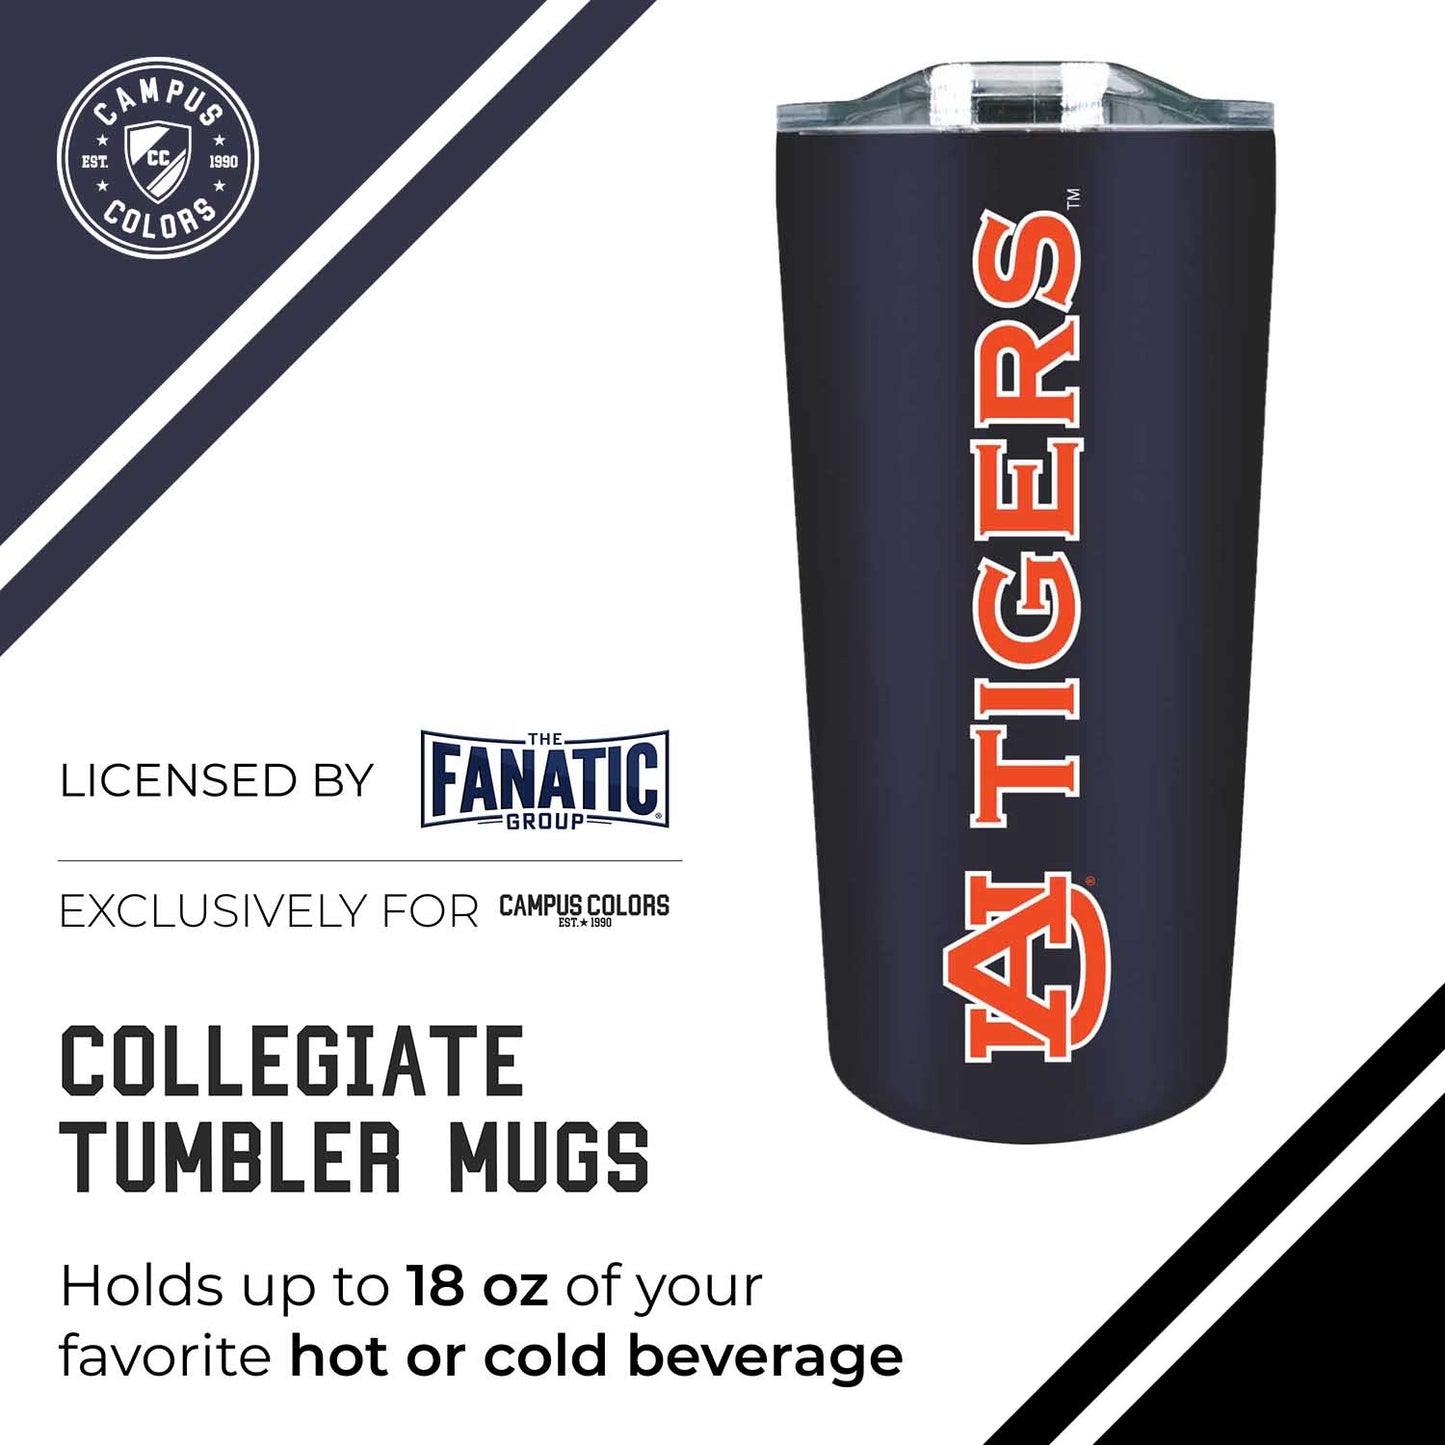 Auburn Tigers NCAA Stainless Steel Tumbler perfect for Gameday - Navy